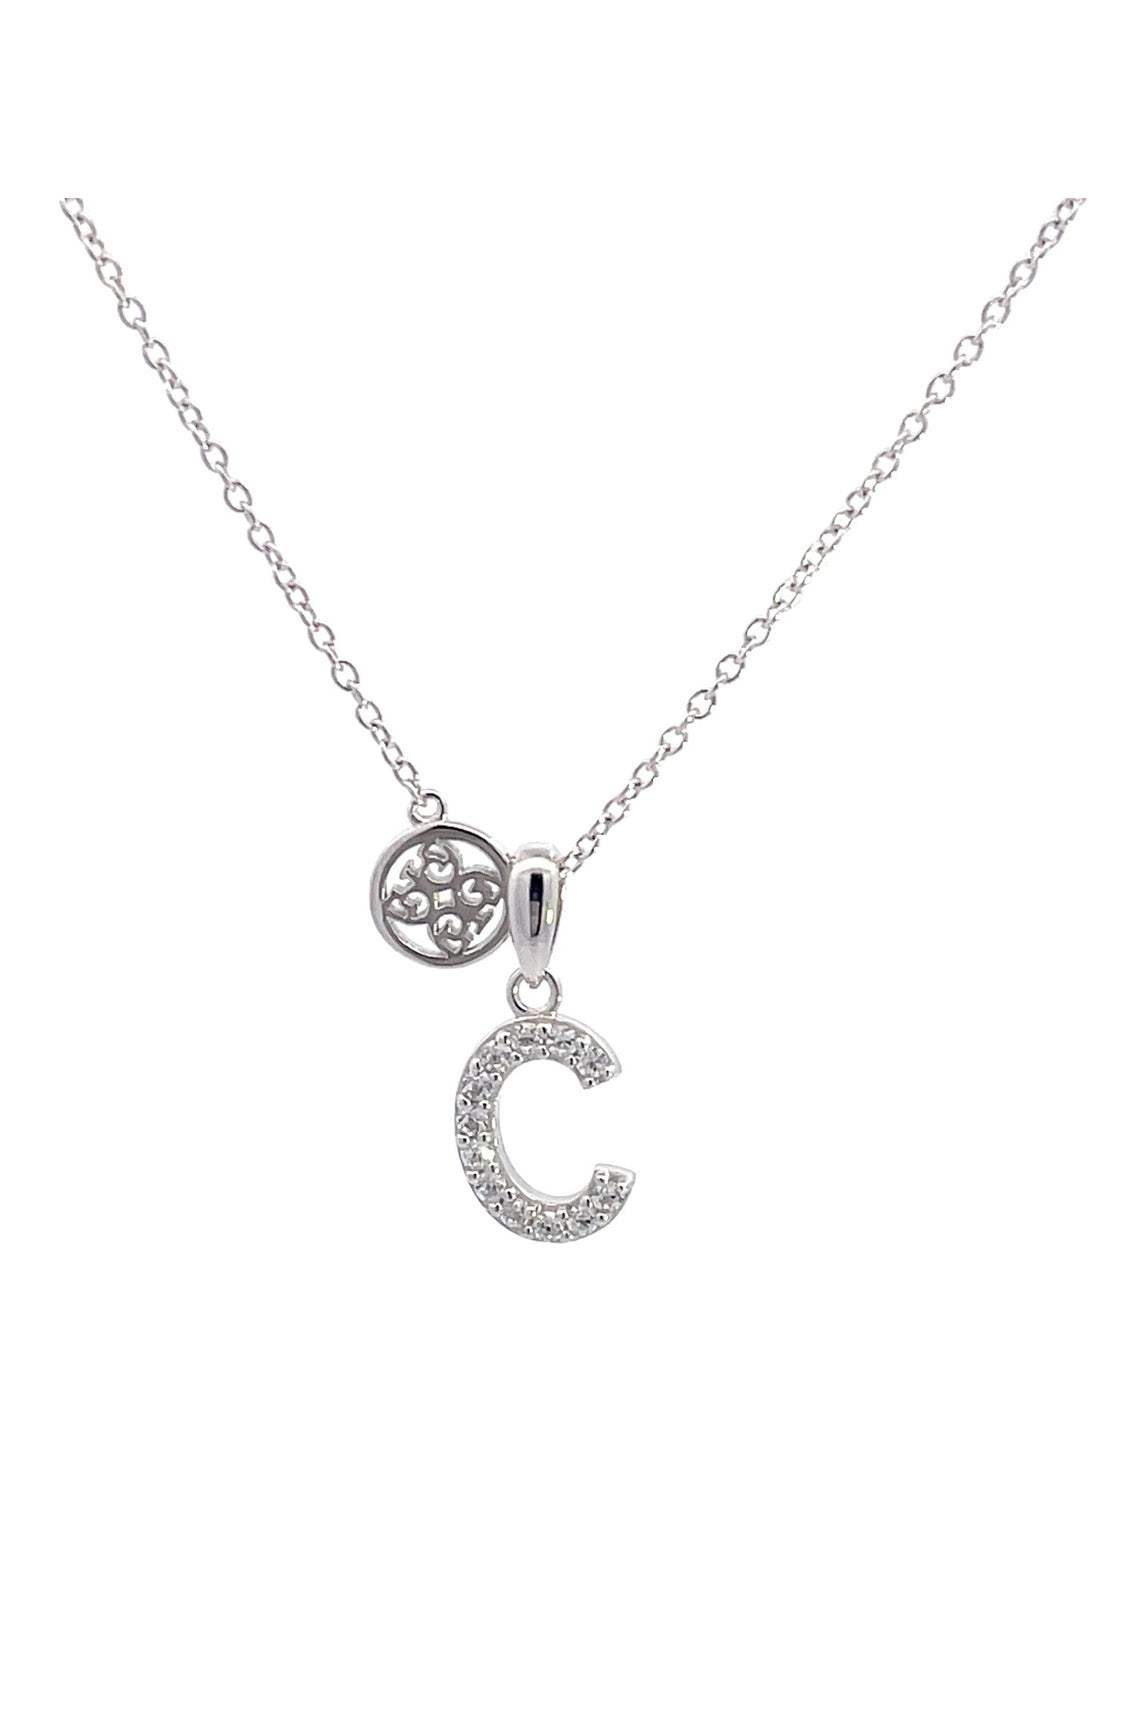 LUXURY LETTERS C INITIAL PENDANT SILVER